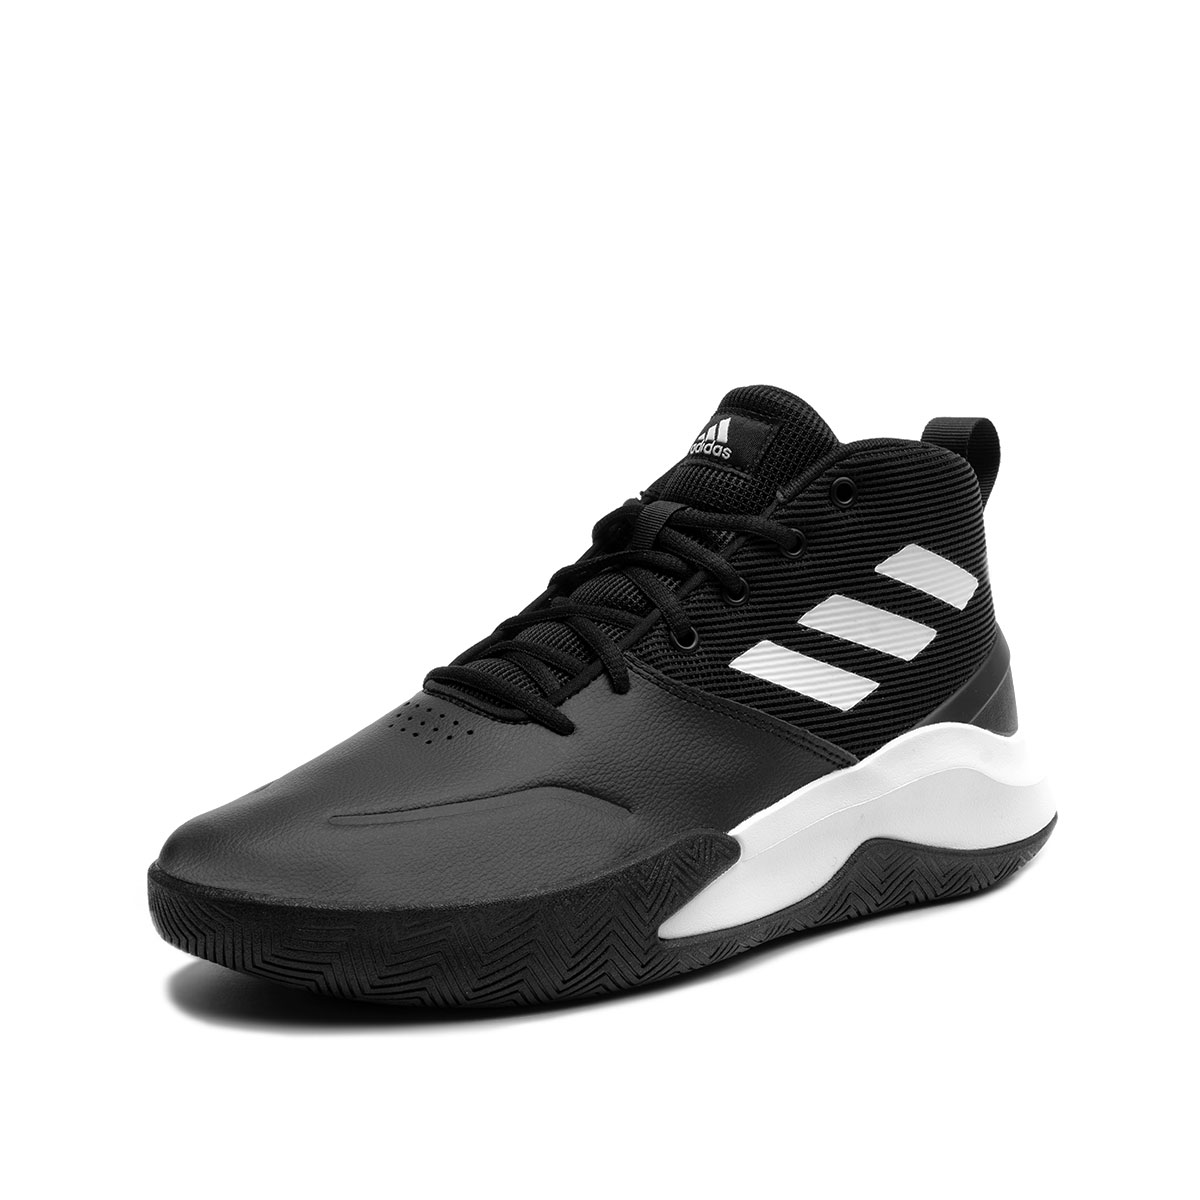 adidas Ownthegame  FY6007